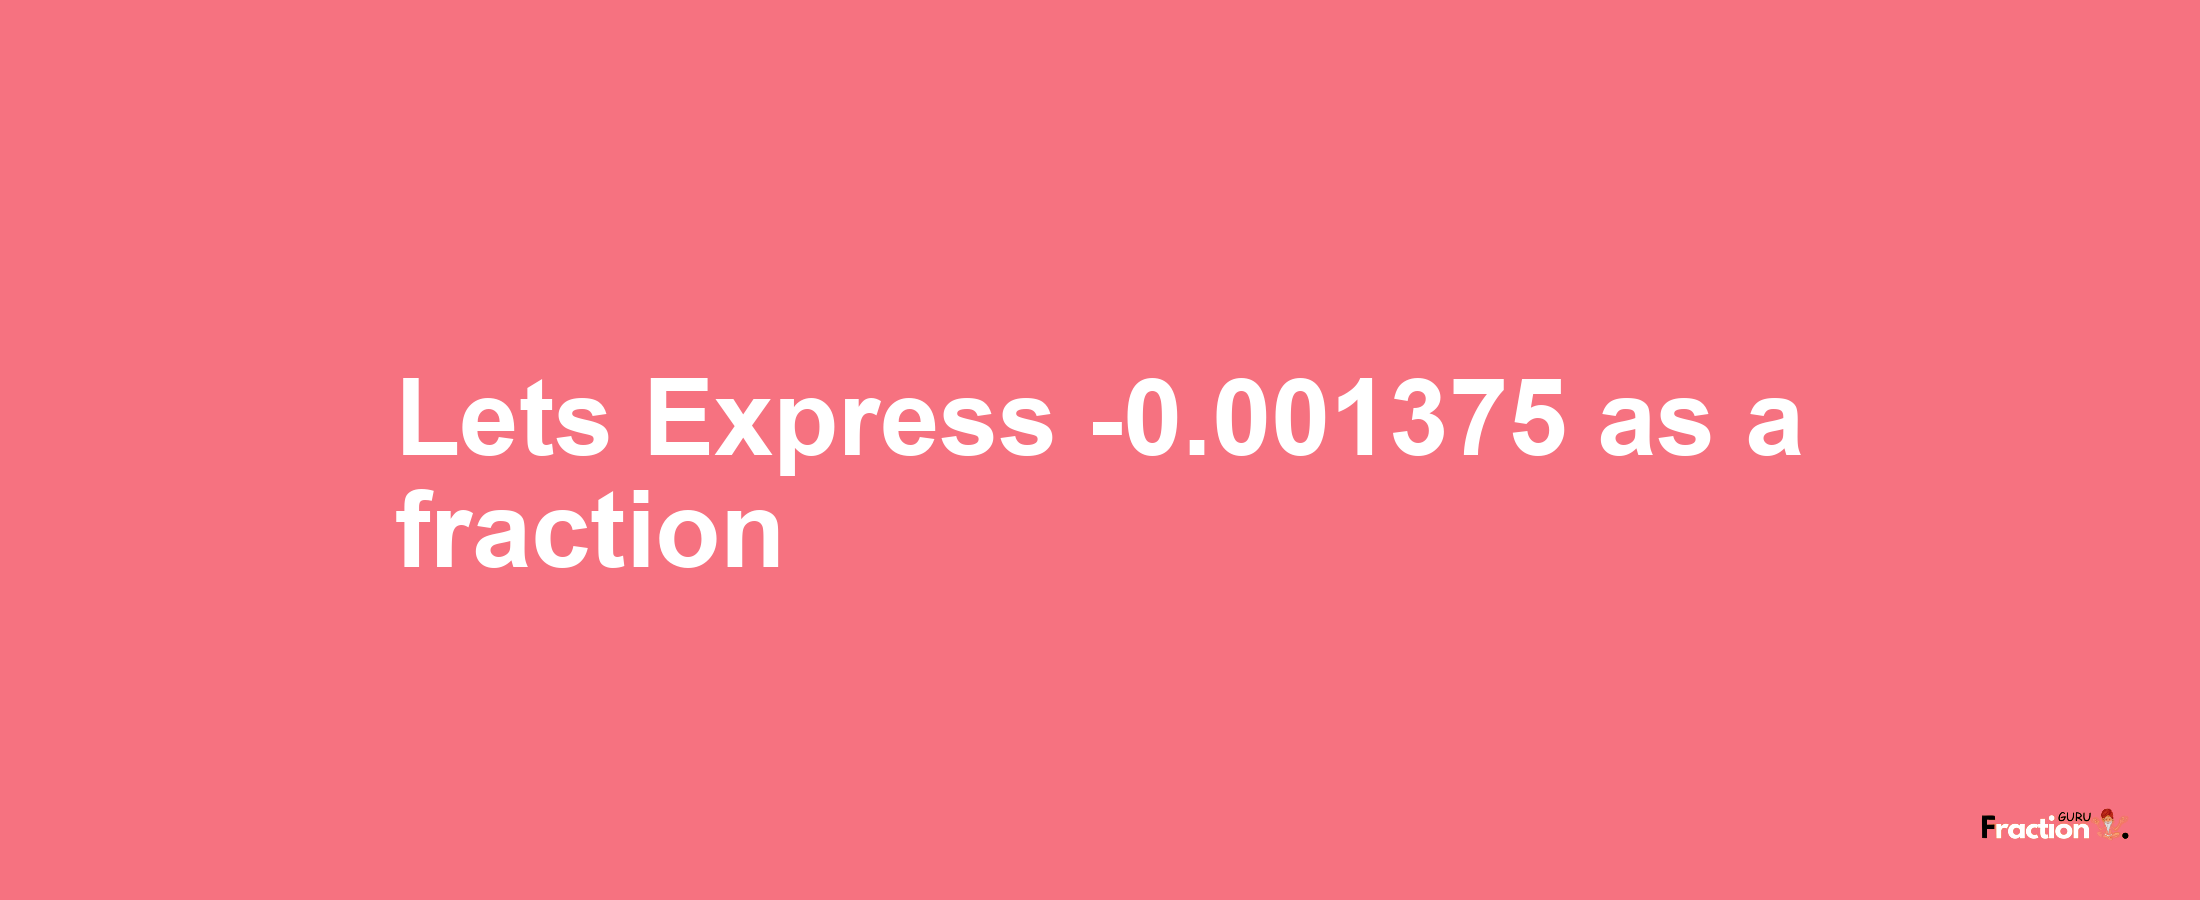 Lets Express -0.001375 as afraction